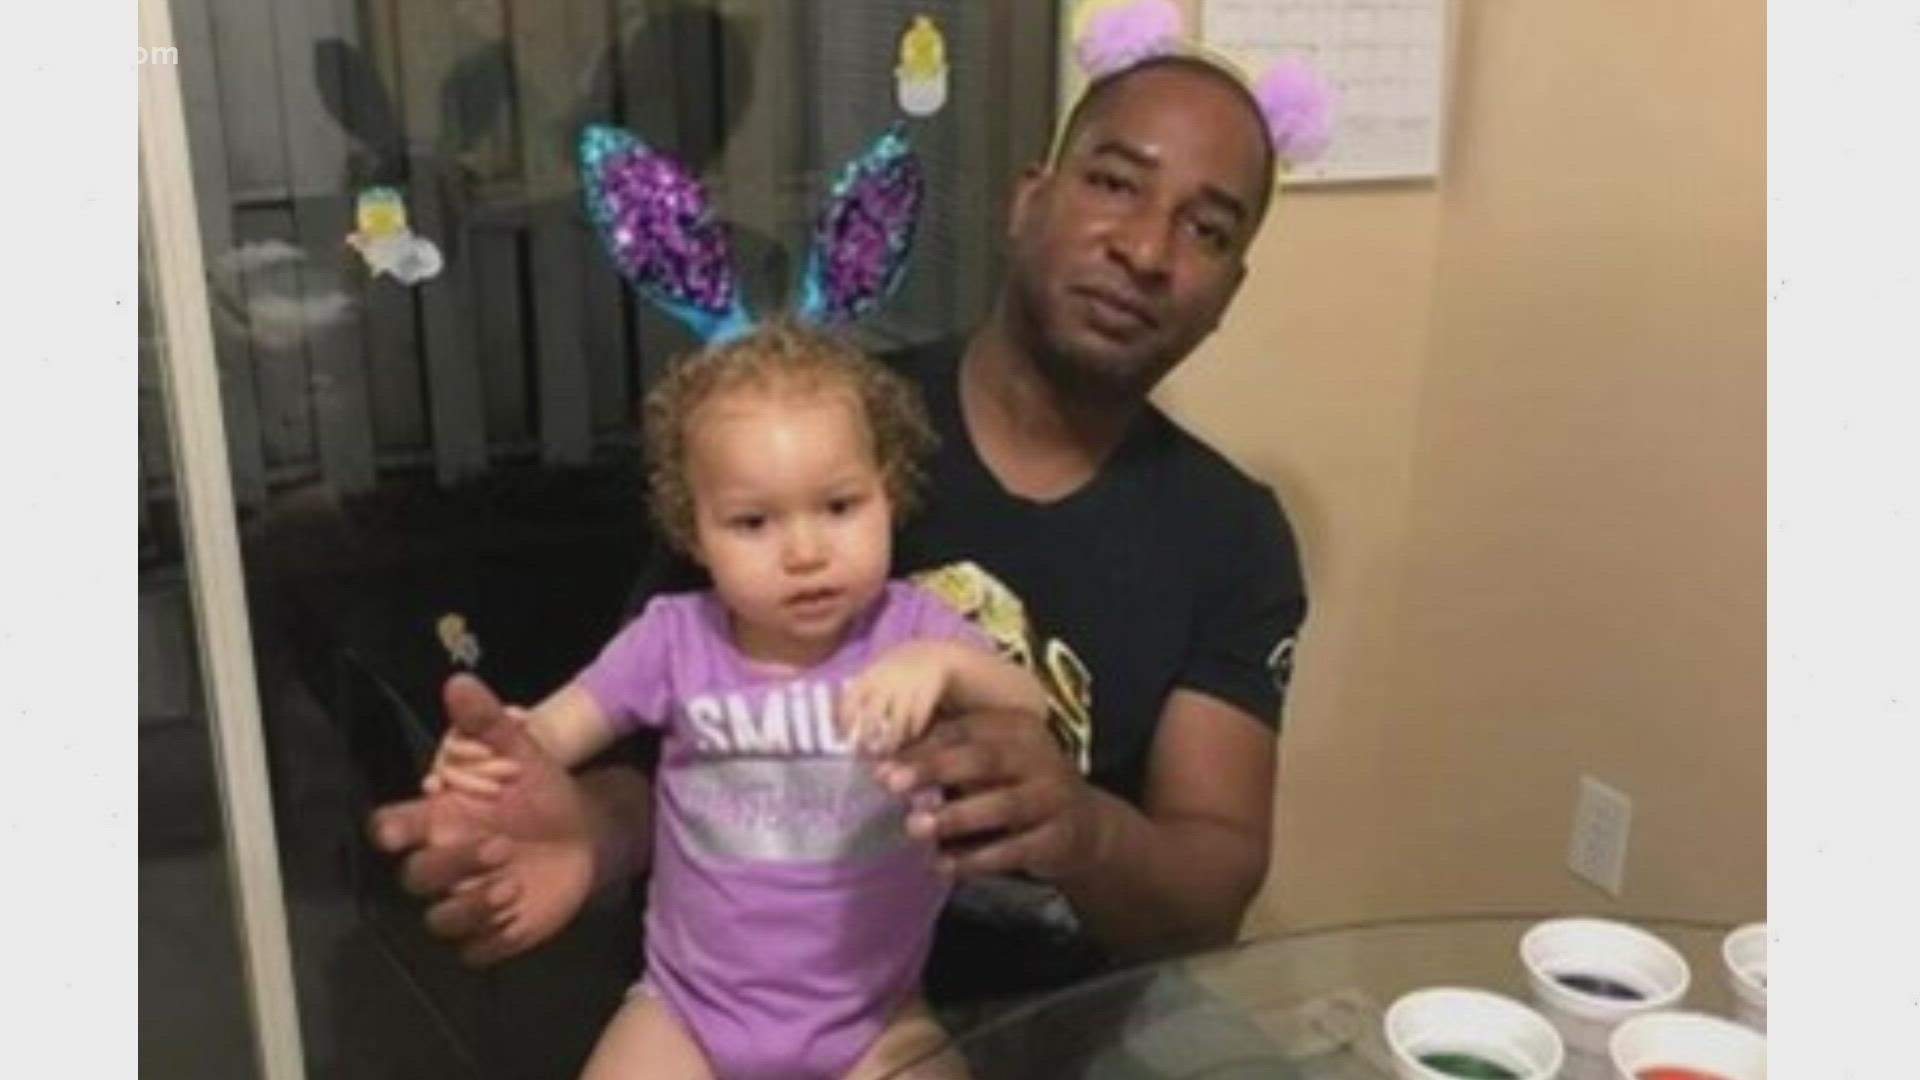 Aspen Jeter's family says they are deeply concerned about the child because she is non-verbal and cannot walk. Aspen was last seen with her father, Antar Jeter.